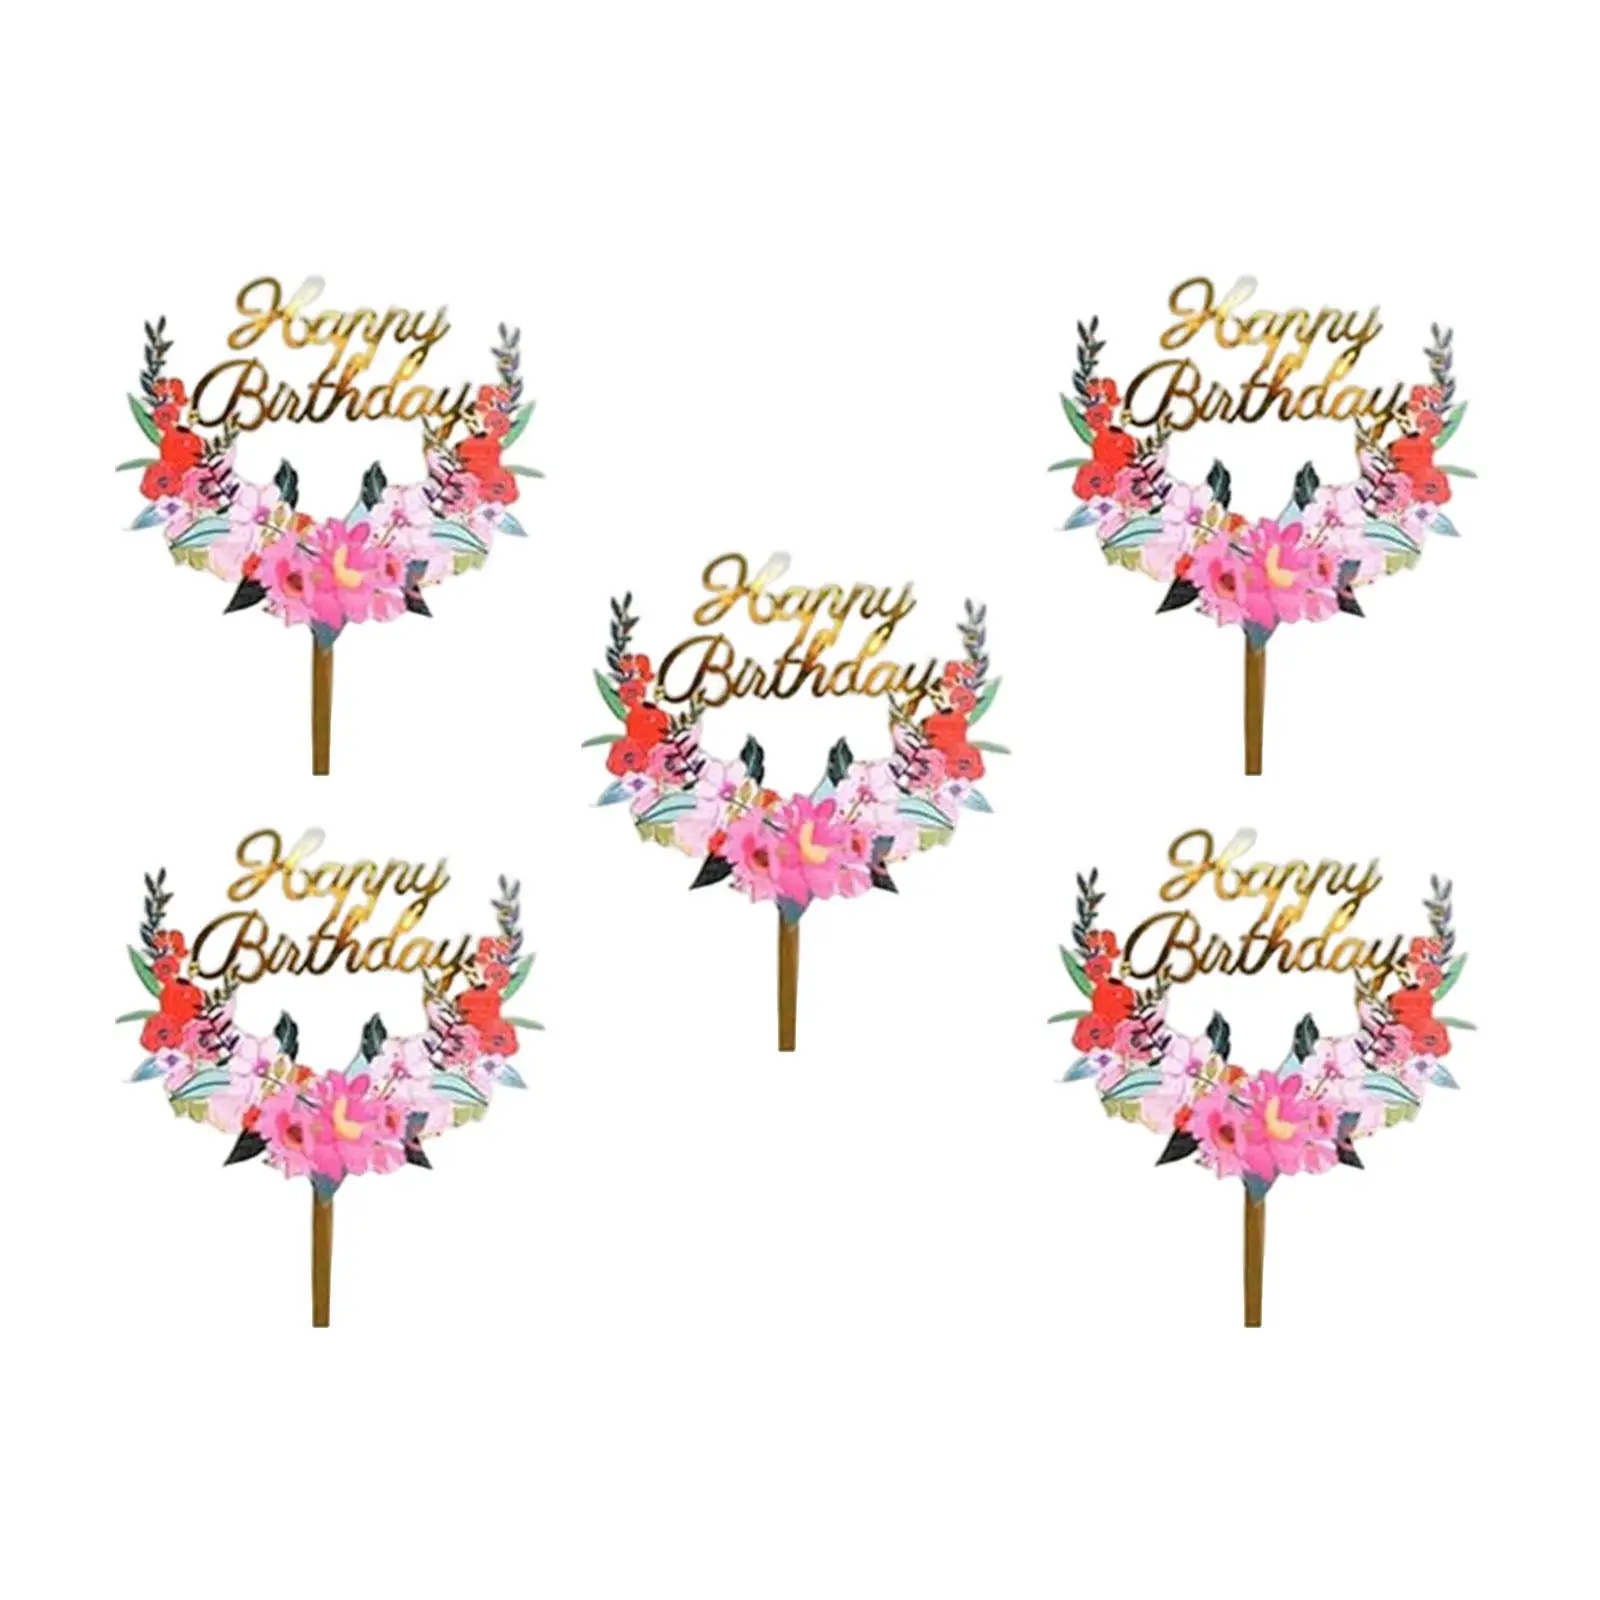 5x Pastoral Cake Toppers Party Favors Elegant Colorful Cake Decorations Delicate Acrylic Desserts Cupcake Toppers for Engagement